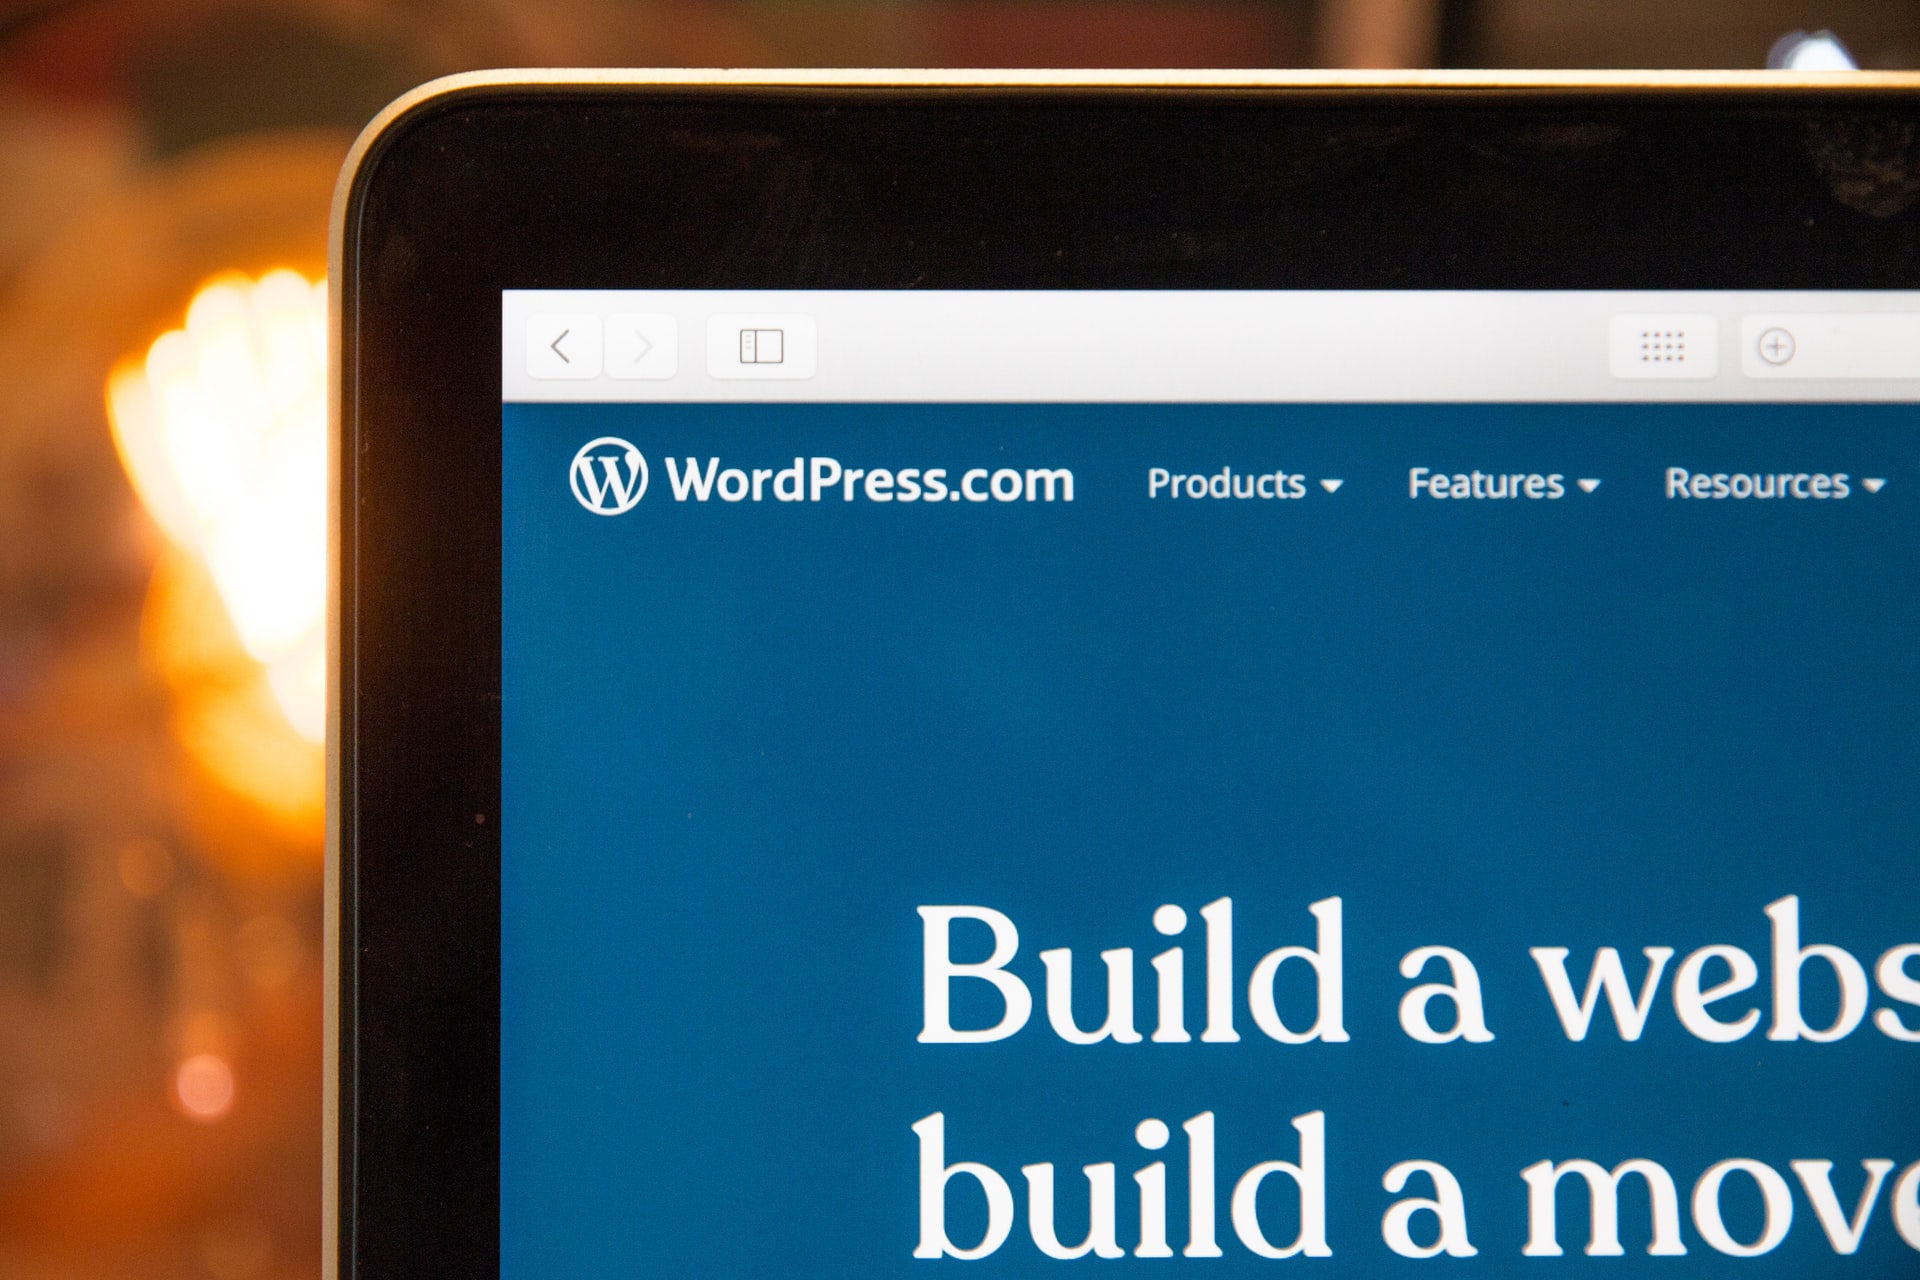 6 Best WordPress Hosting Companies in 2021: Get Resources You Need to Build a Sophisticated WordPress Site